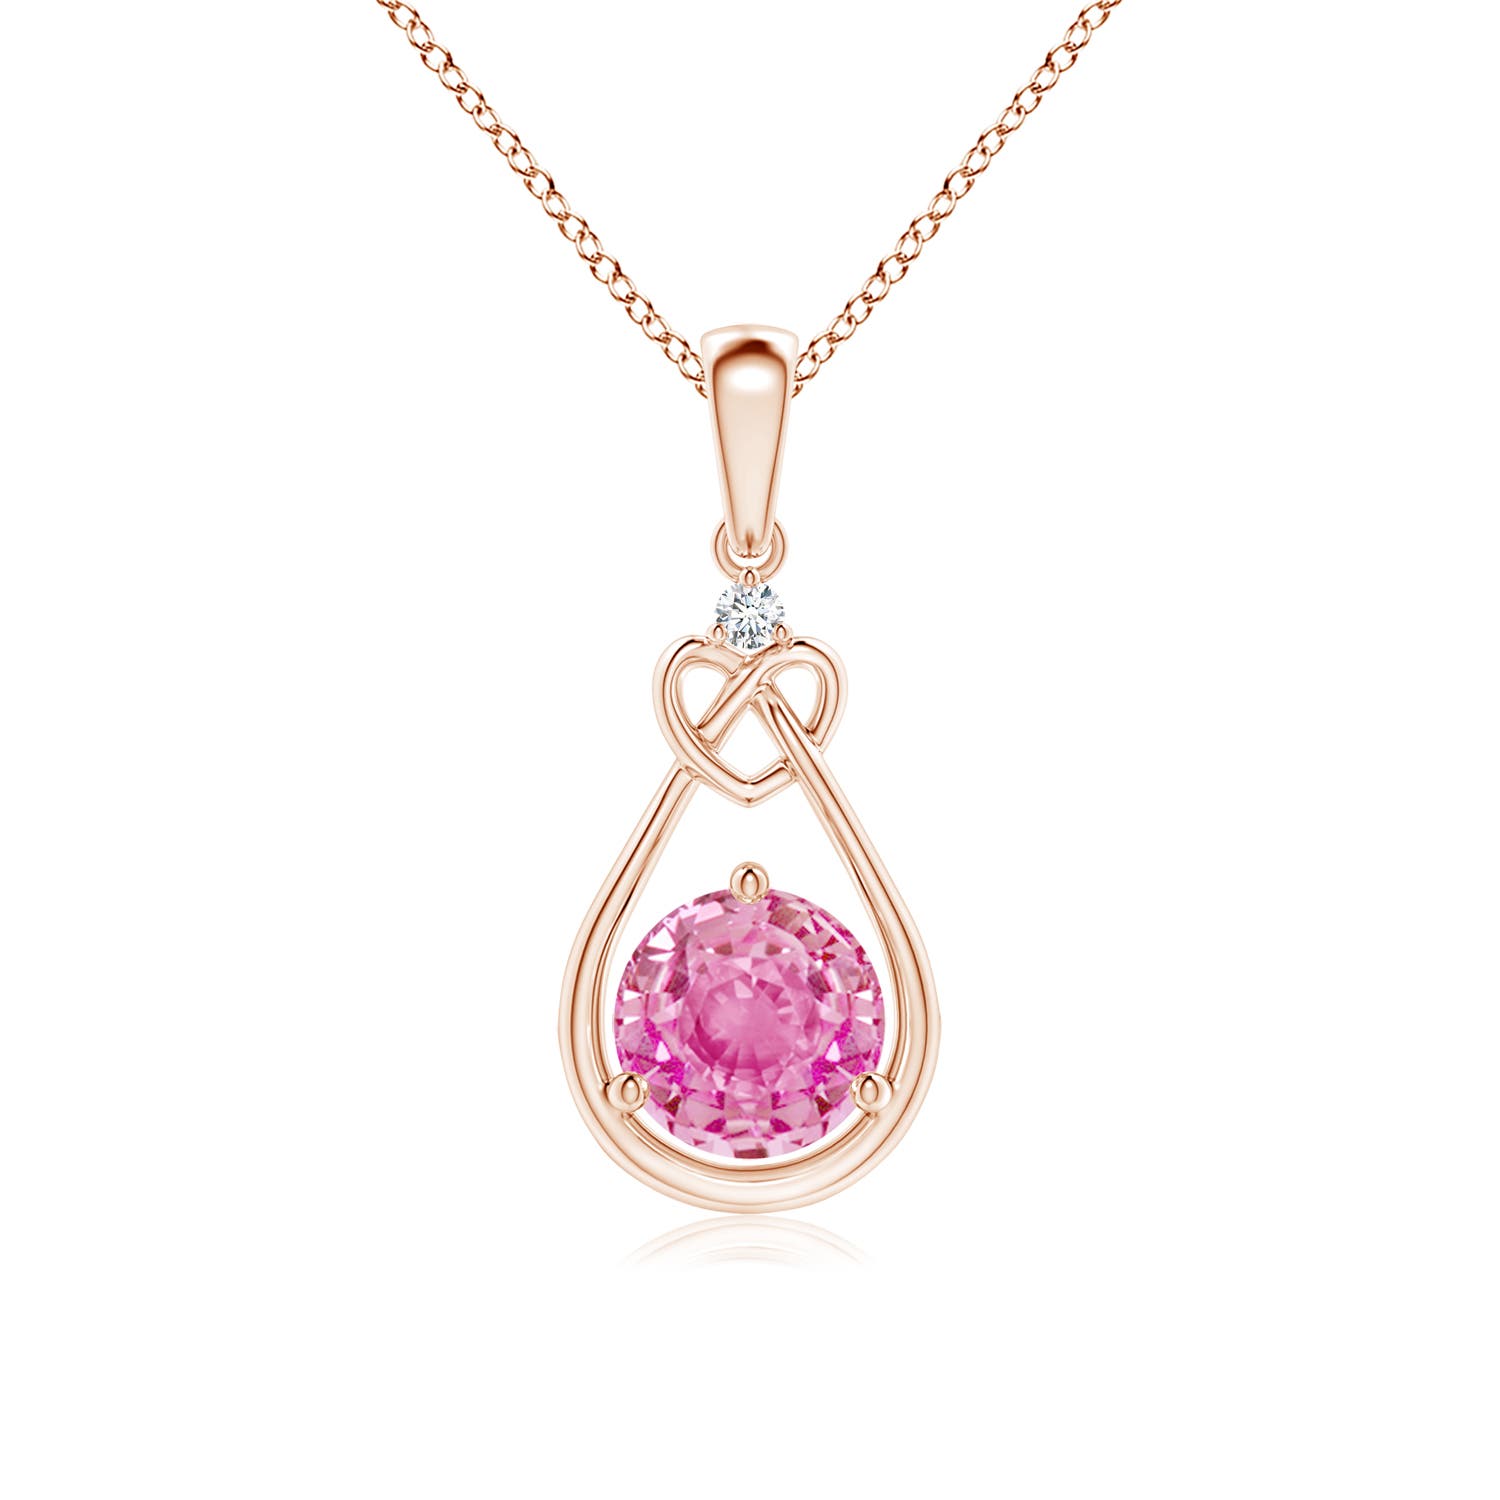 AA - Pink Sapphire / 1.01 CT / 14 KT Rose Gold